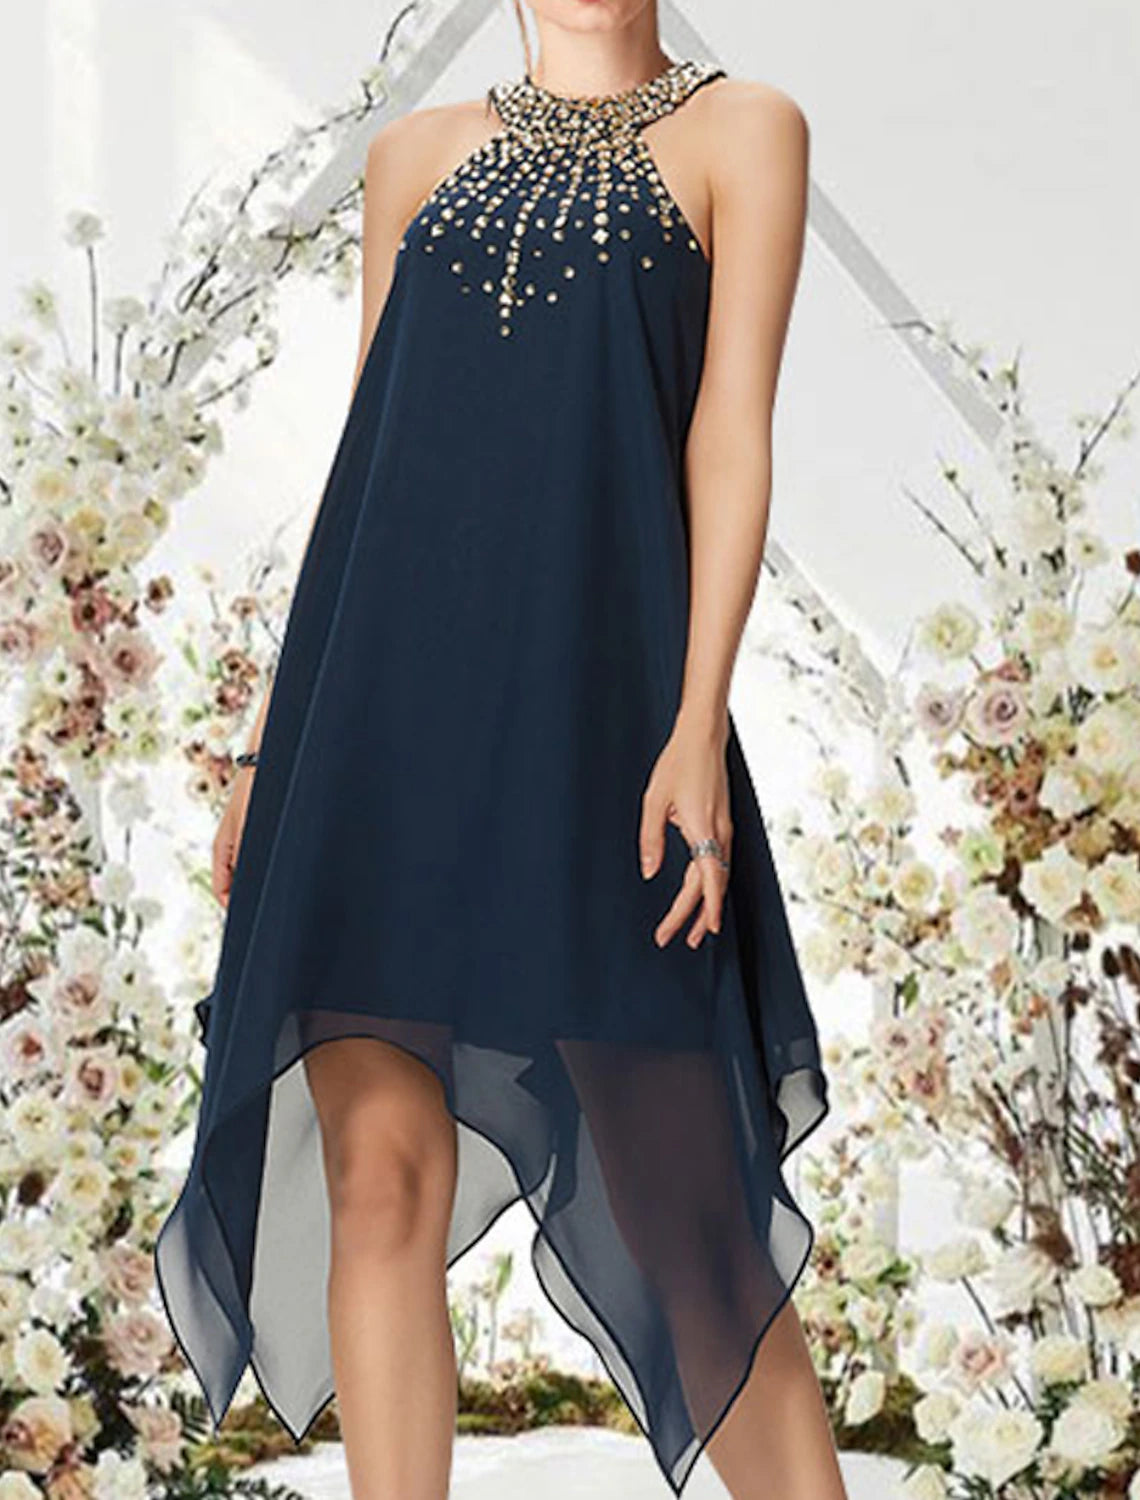 A-Line Cocktail Dresses Flirty Dress Wedding Guest Cocktail Party Asymmetrical Sleeveless Halter Neck Chiffon with Crystals Beading